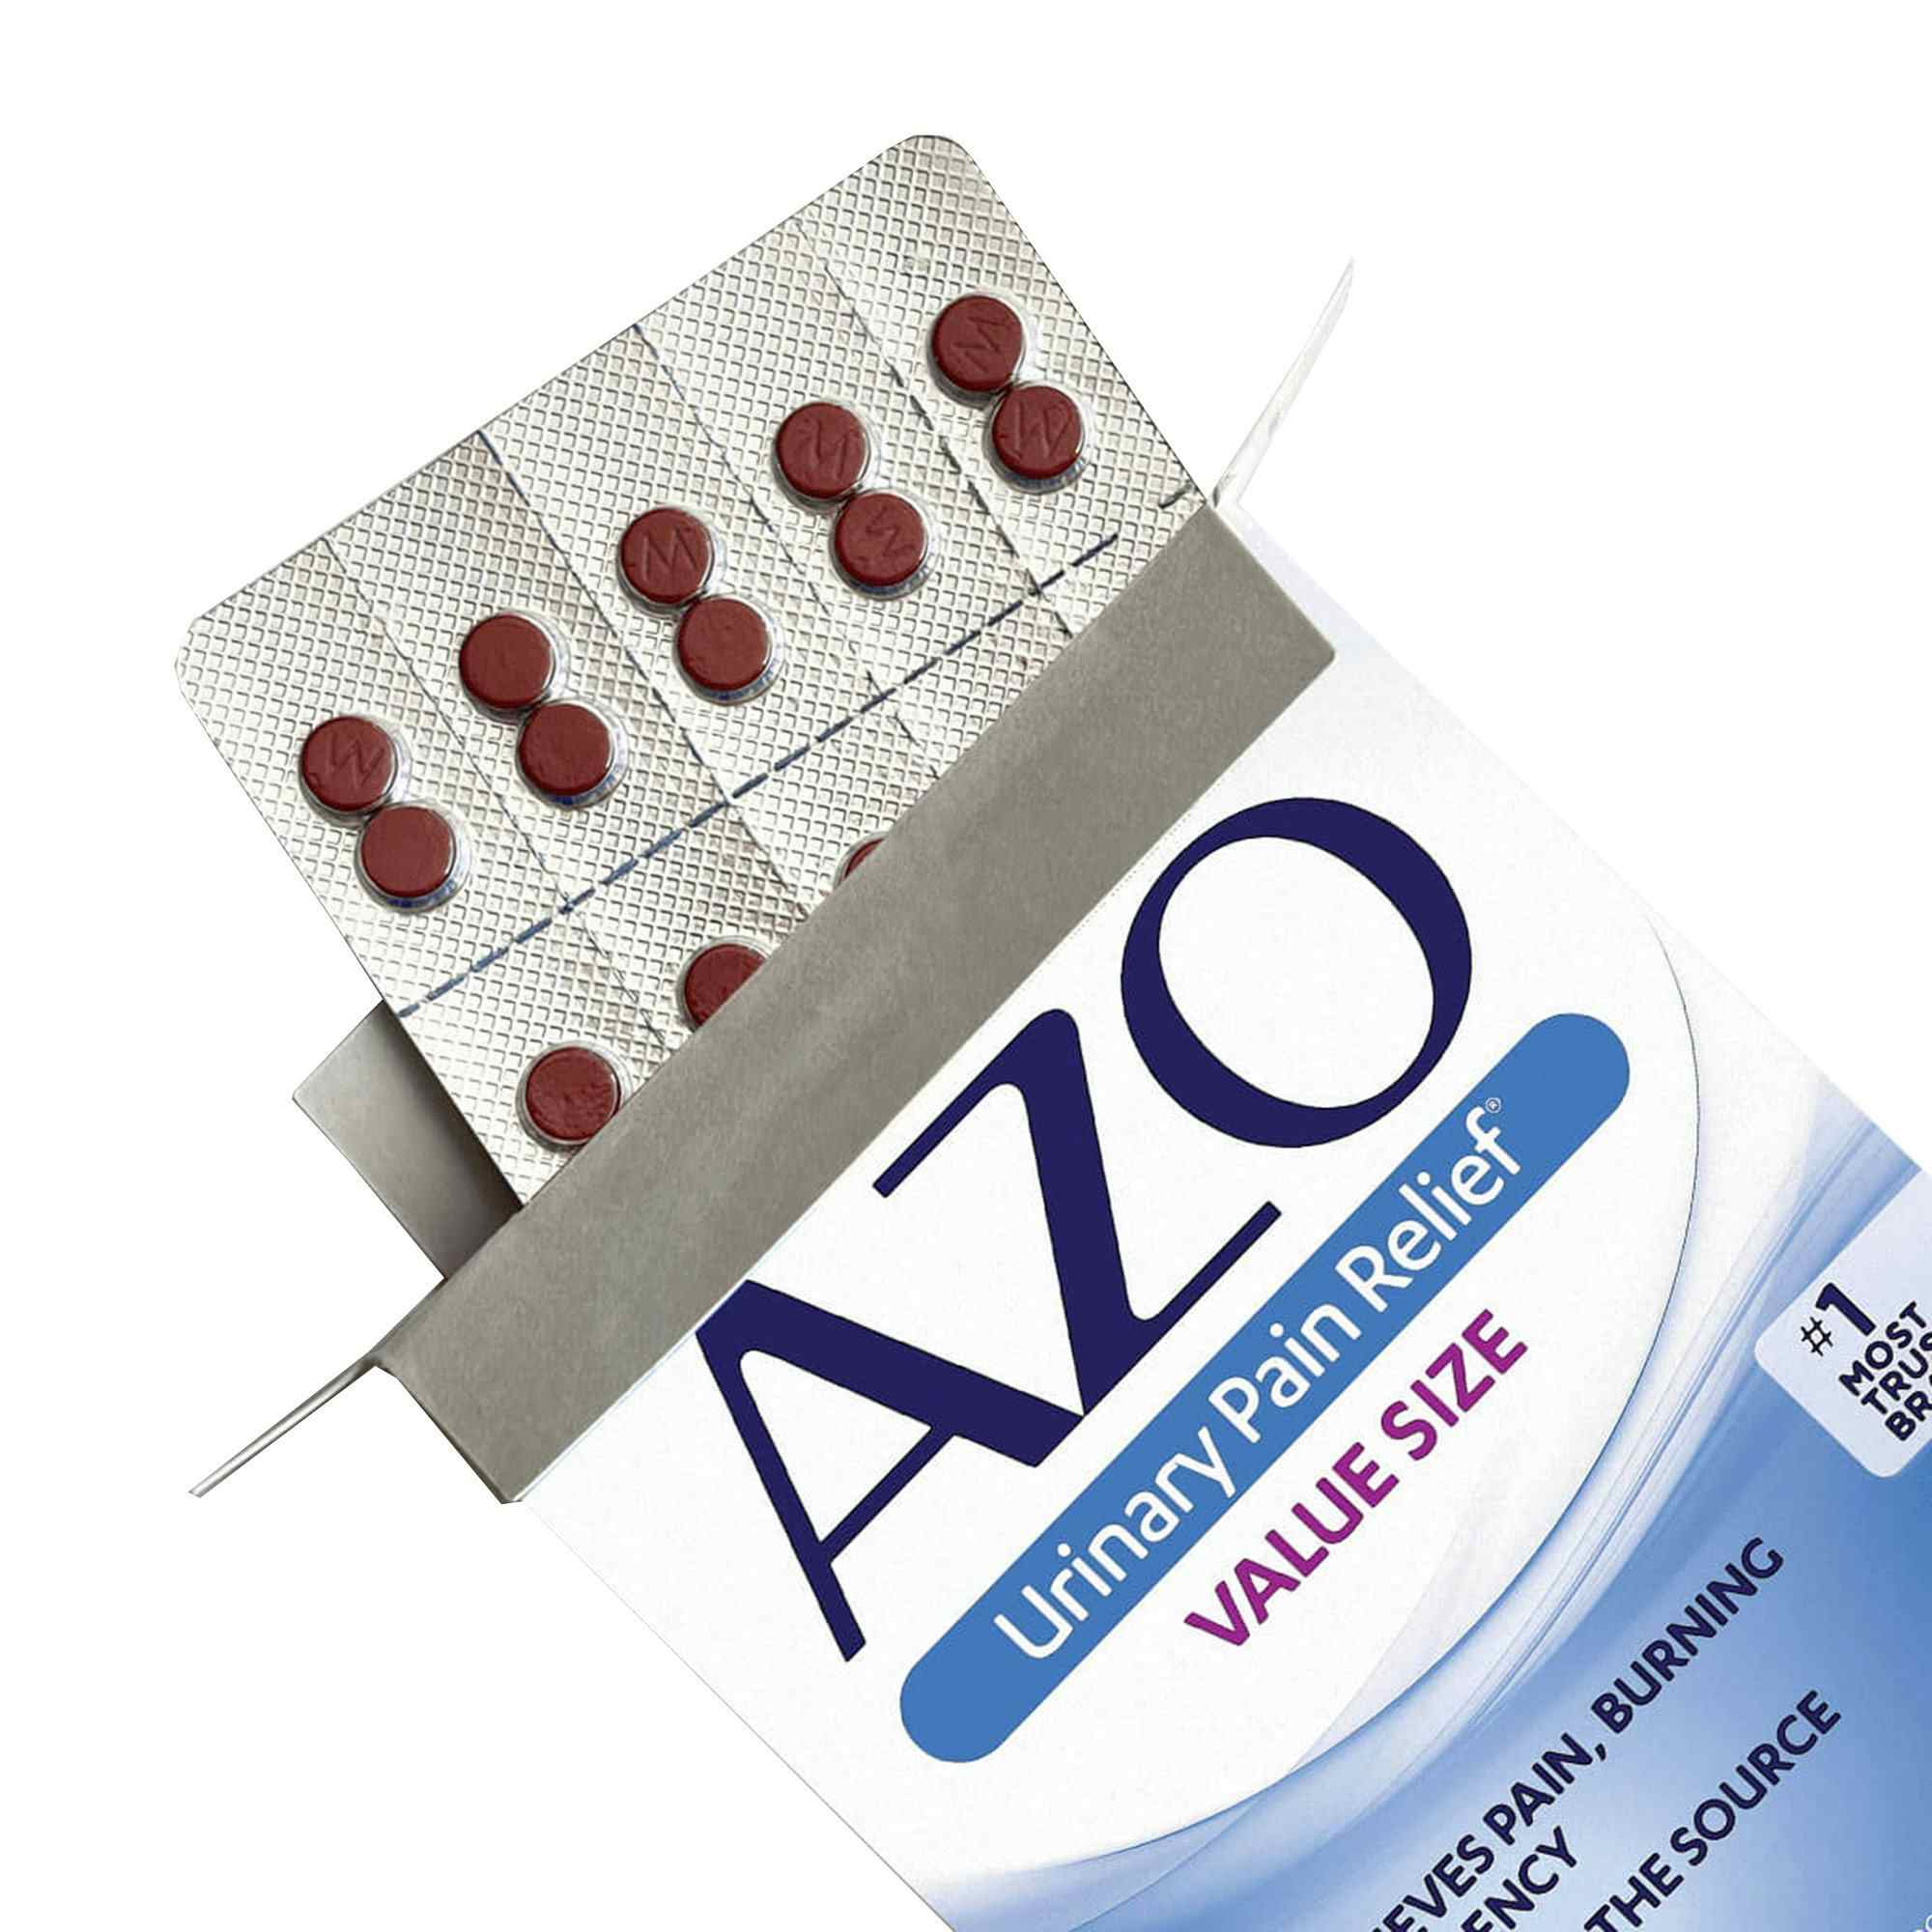 Azo Standard Urinary Pain Relief, 30 Tablets, 87651030152, 1 Bottle